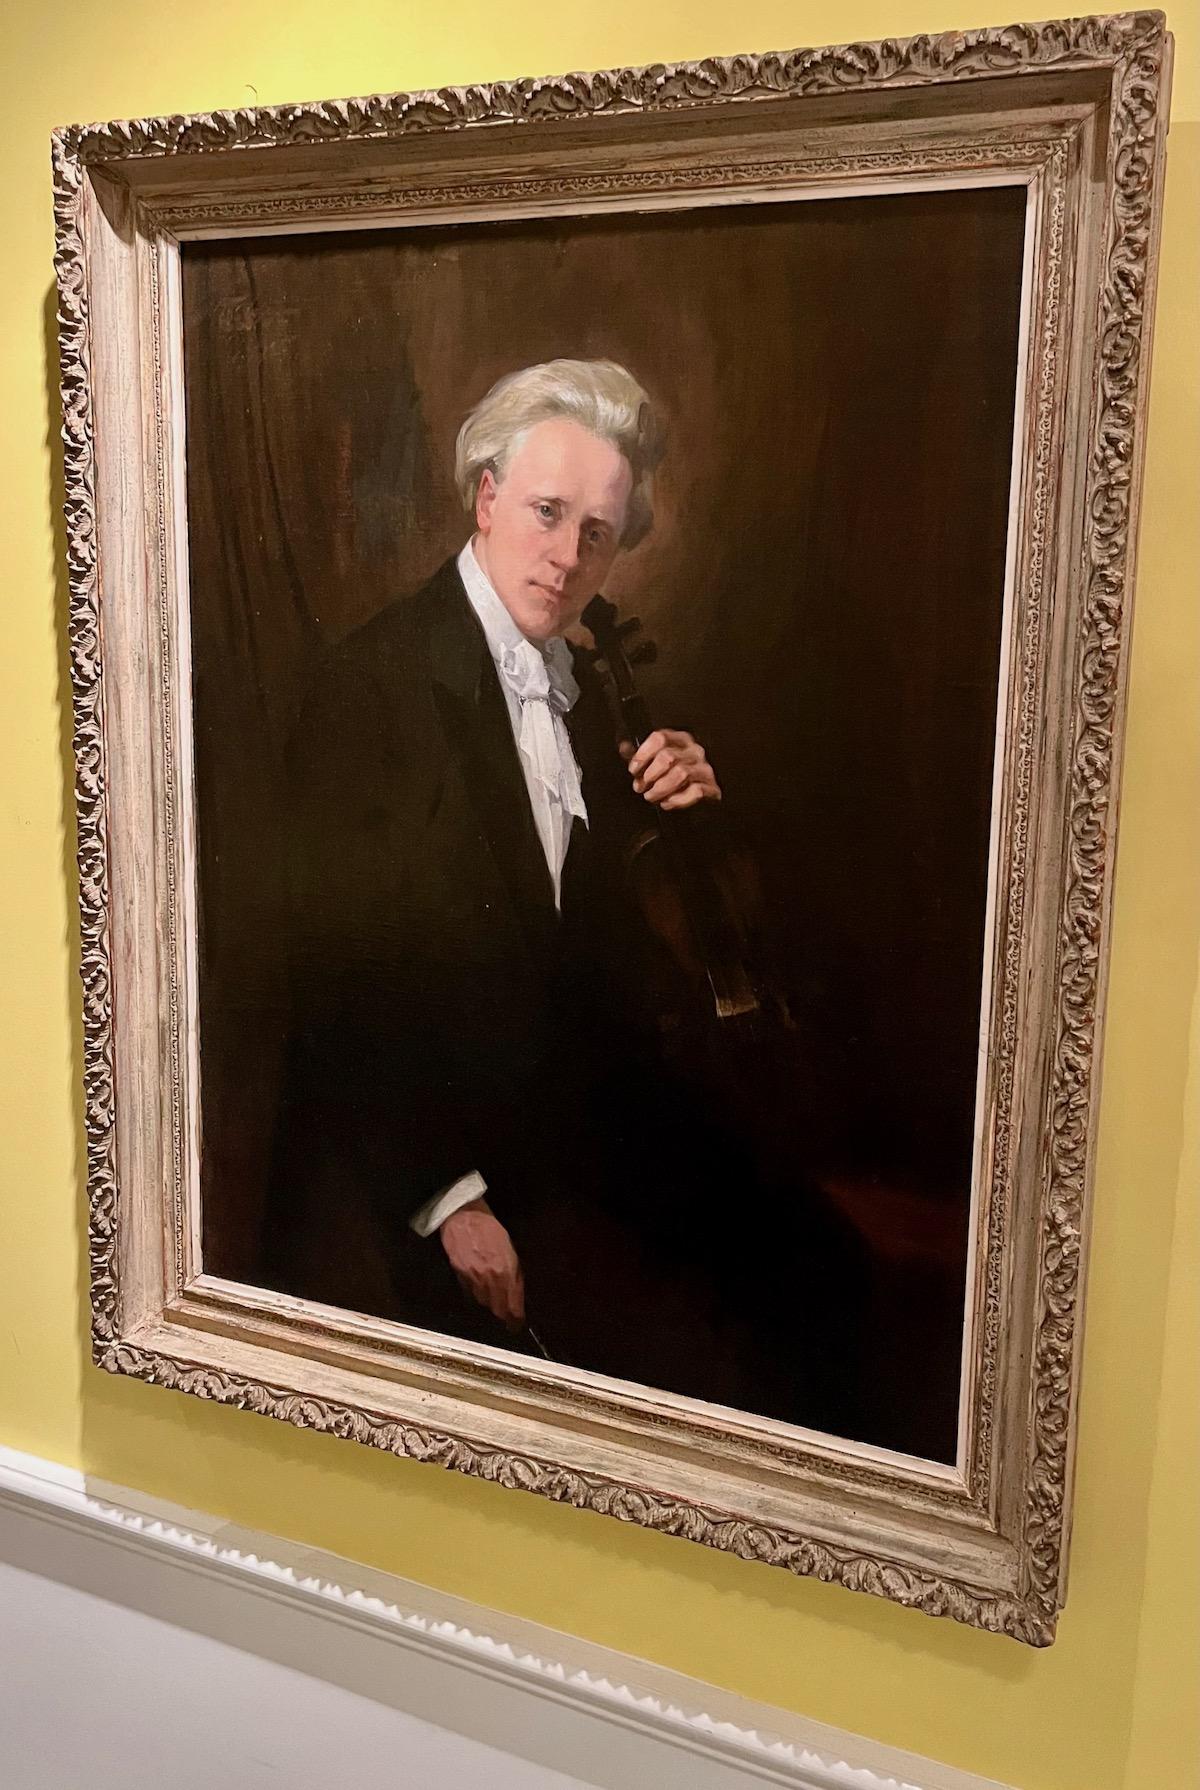 A unique oil painting of 1st violinist with the Boston Symphony Orchestra as well as the famous very popular Boston Pops, Mr. Einer Hansen.
Mr. Hansen was born In Denmark in 1890 and passed in 1976.
The painting proudly depicts Mr. Hansen posing